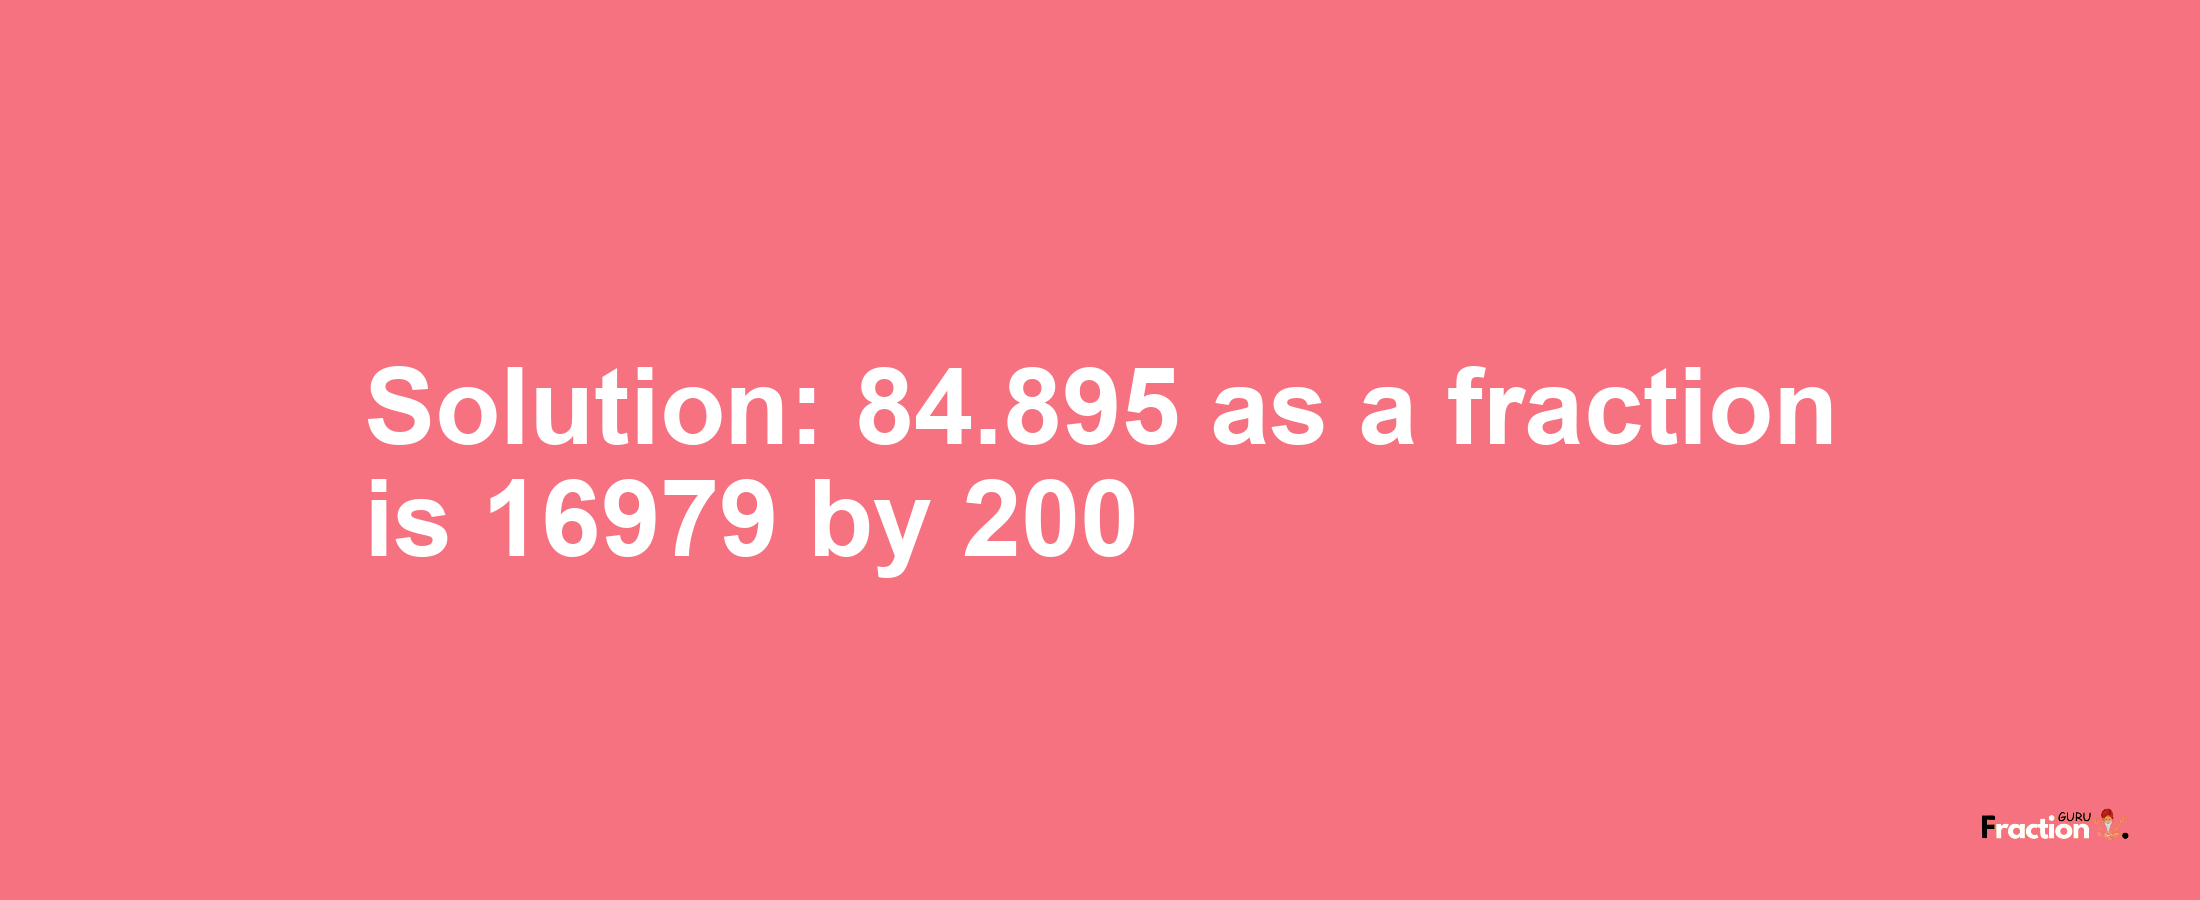 Solution:84.895 as a fraction is 16979/200